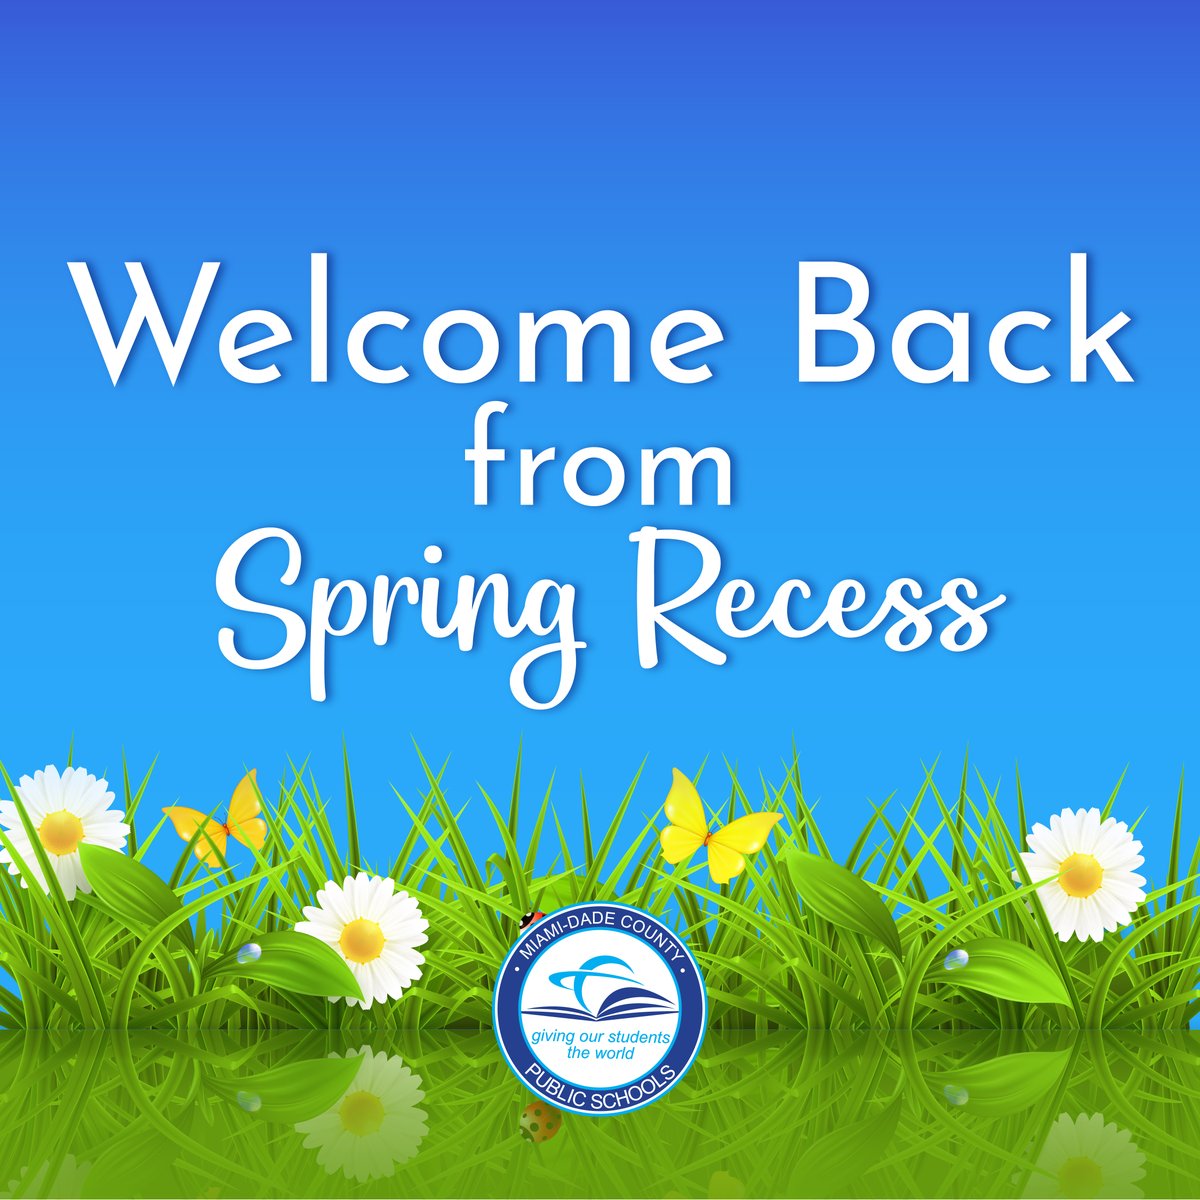 Whether you spent your #SpringRecess exploring new adventures or enjoying some well-deserved relaxation, know that you are stepping back into a community filled with boundless support & encouragement. Let's finish the remainder of the school year strong! #YourBestChoiceMDCPS